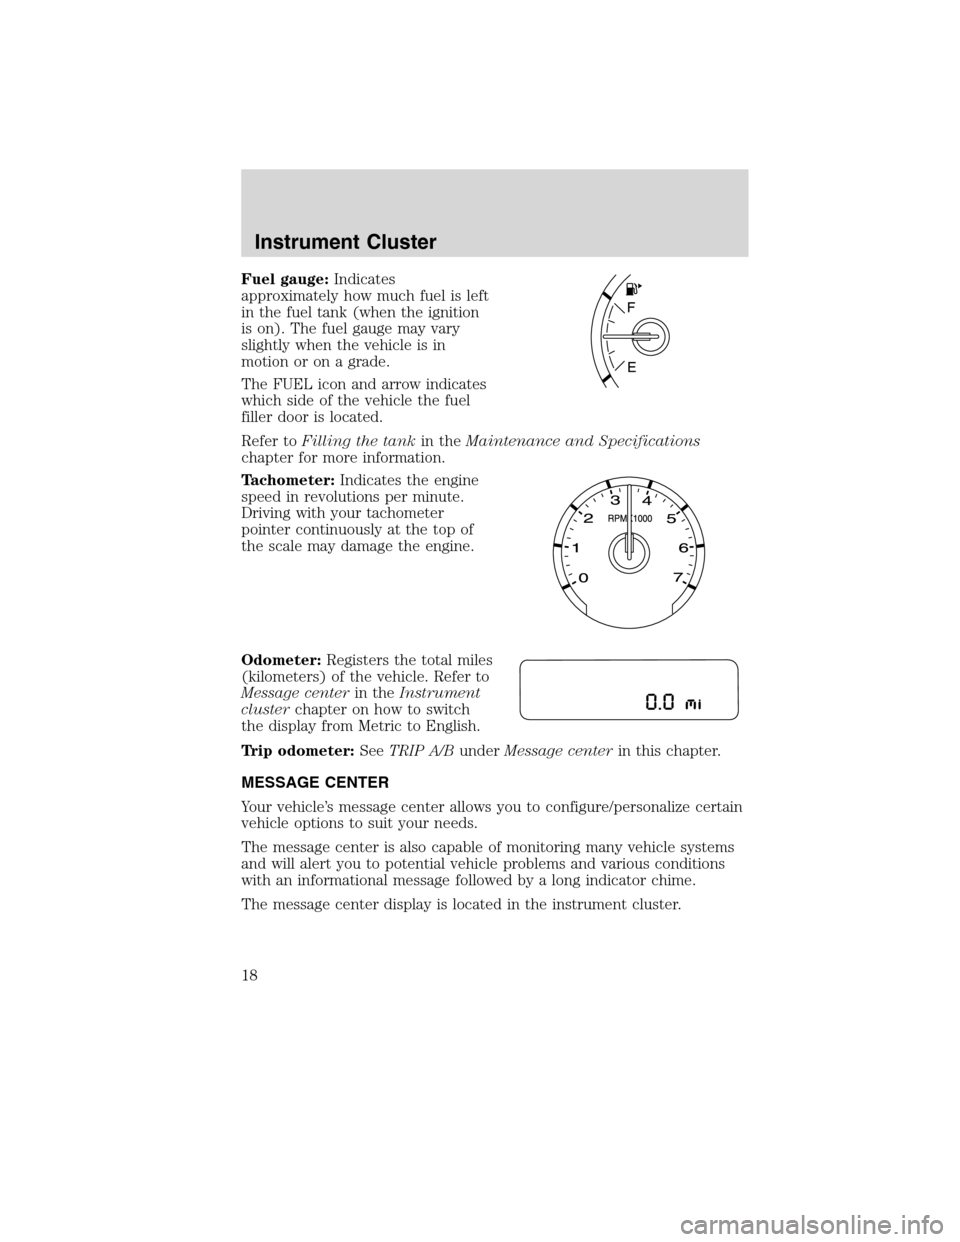 LINCOLN MKS 2010 User Guide Fuel gauge:Indicates
approximately how much fuel is left
in the fuel tank (when the ignition
is on). The fuel gauge may vary
slightly when the vehicle is in
motion or on a grade.
The FUEL icon and arr